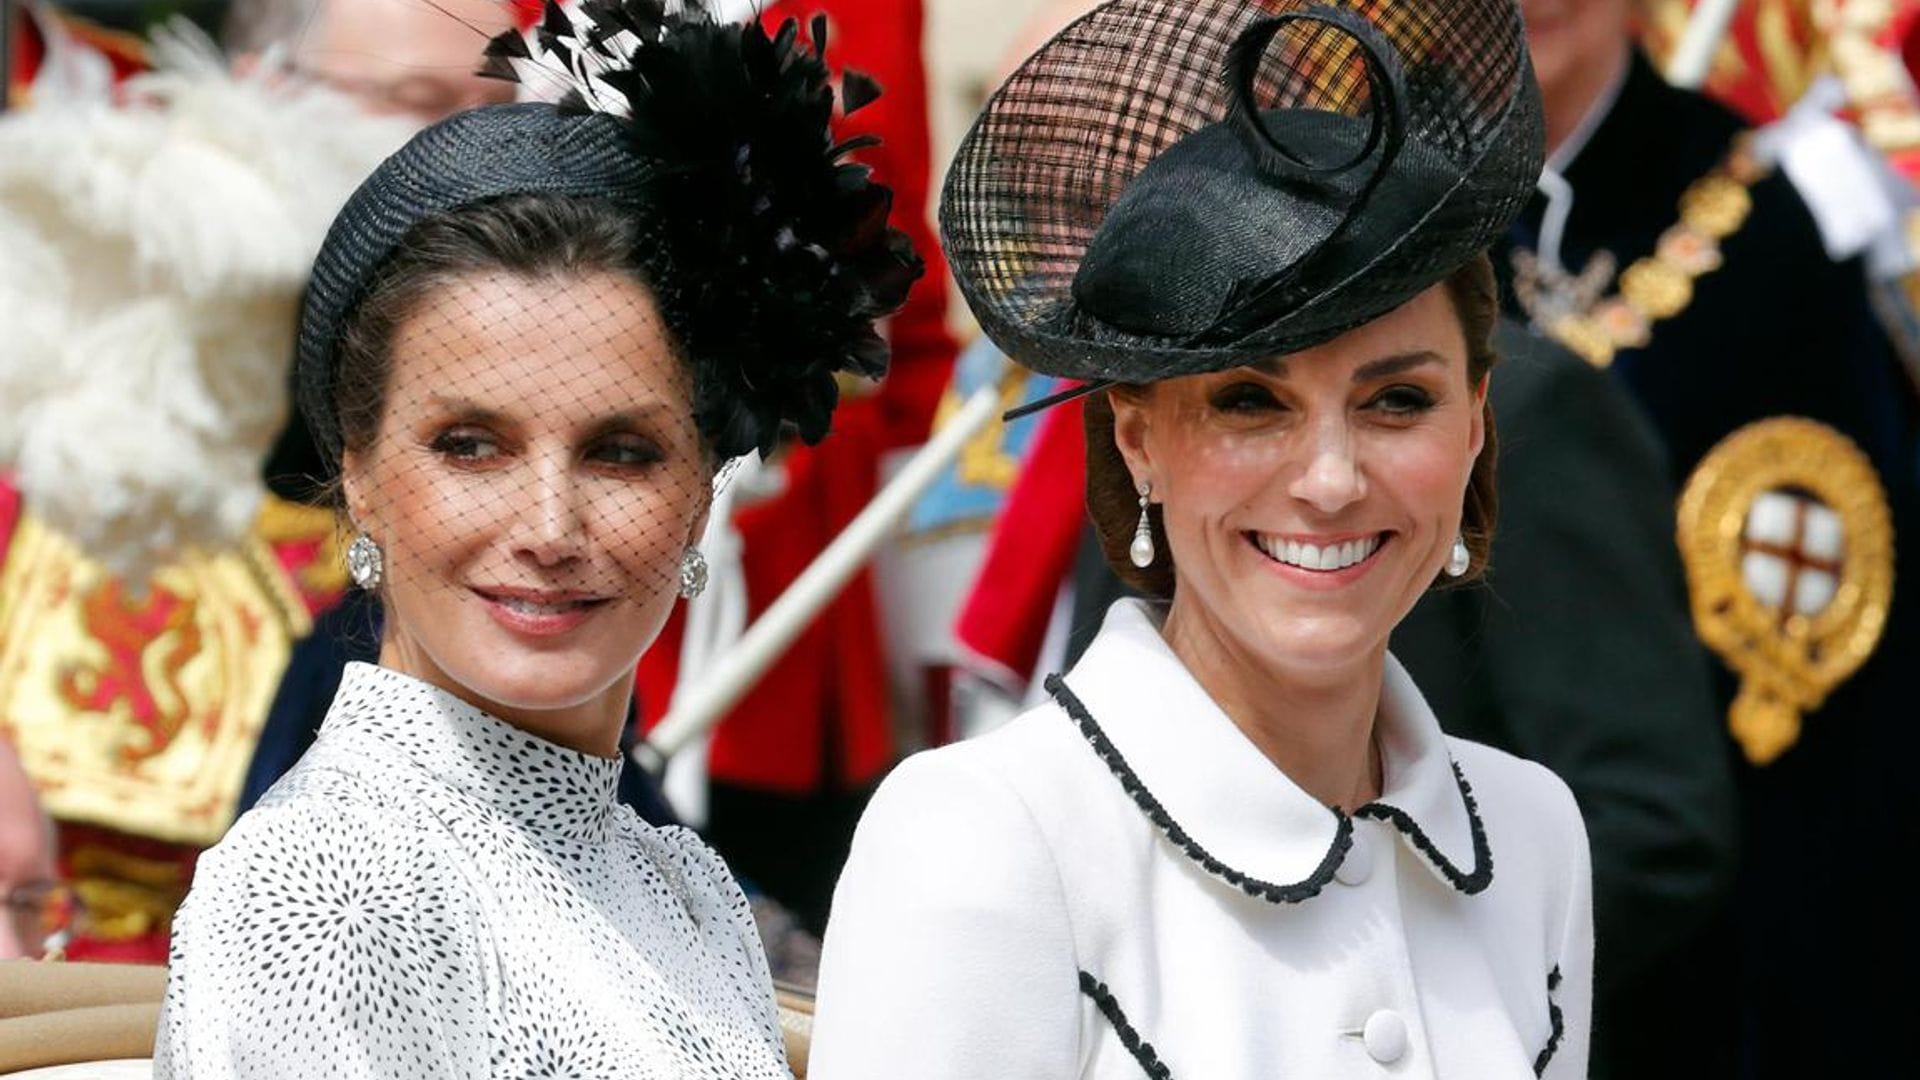 Queen Letizia takes a page out of Kate Middleton’s style book for latest outing in Madrid